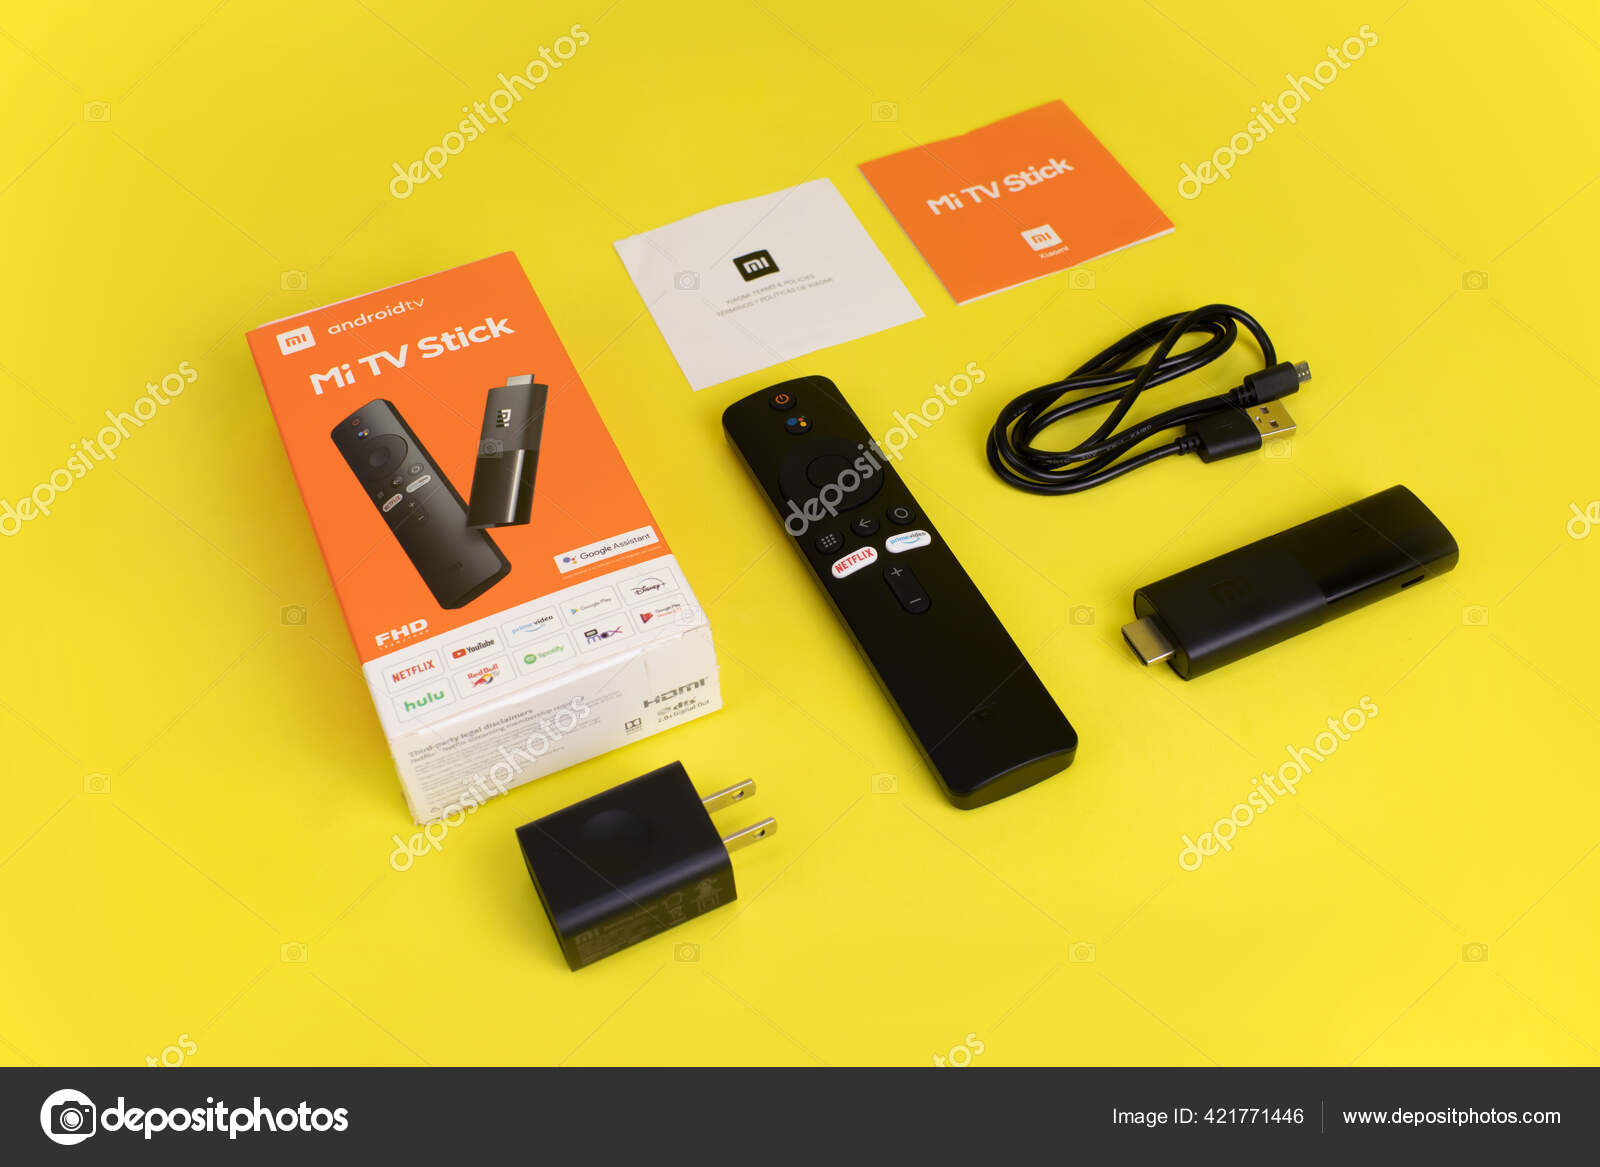 køre Overlegenhed prøve Hdmi Stick Android Includes Charger Remote Control Micro Usb Cable – Stock  Editorial Photo © denismantilla #421771446